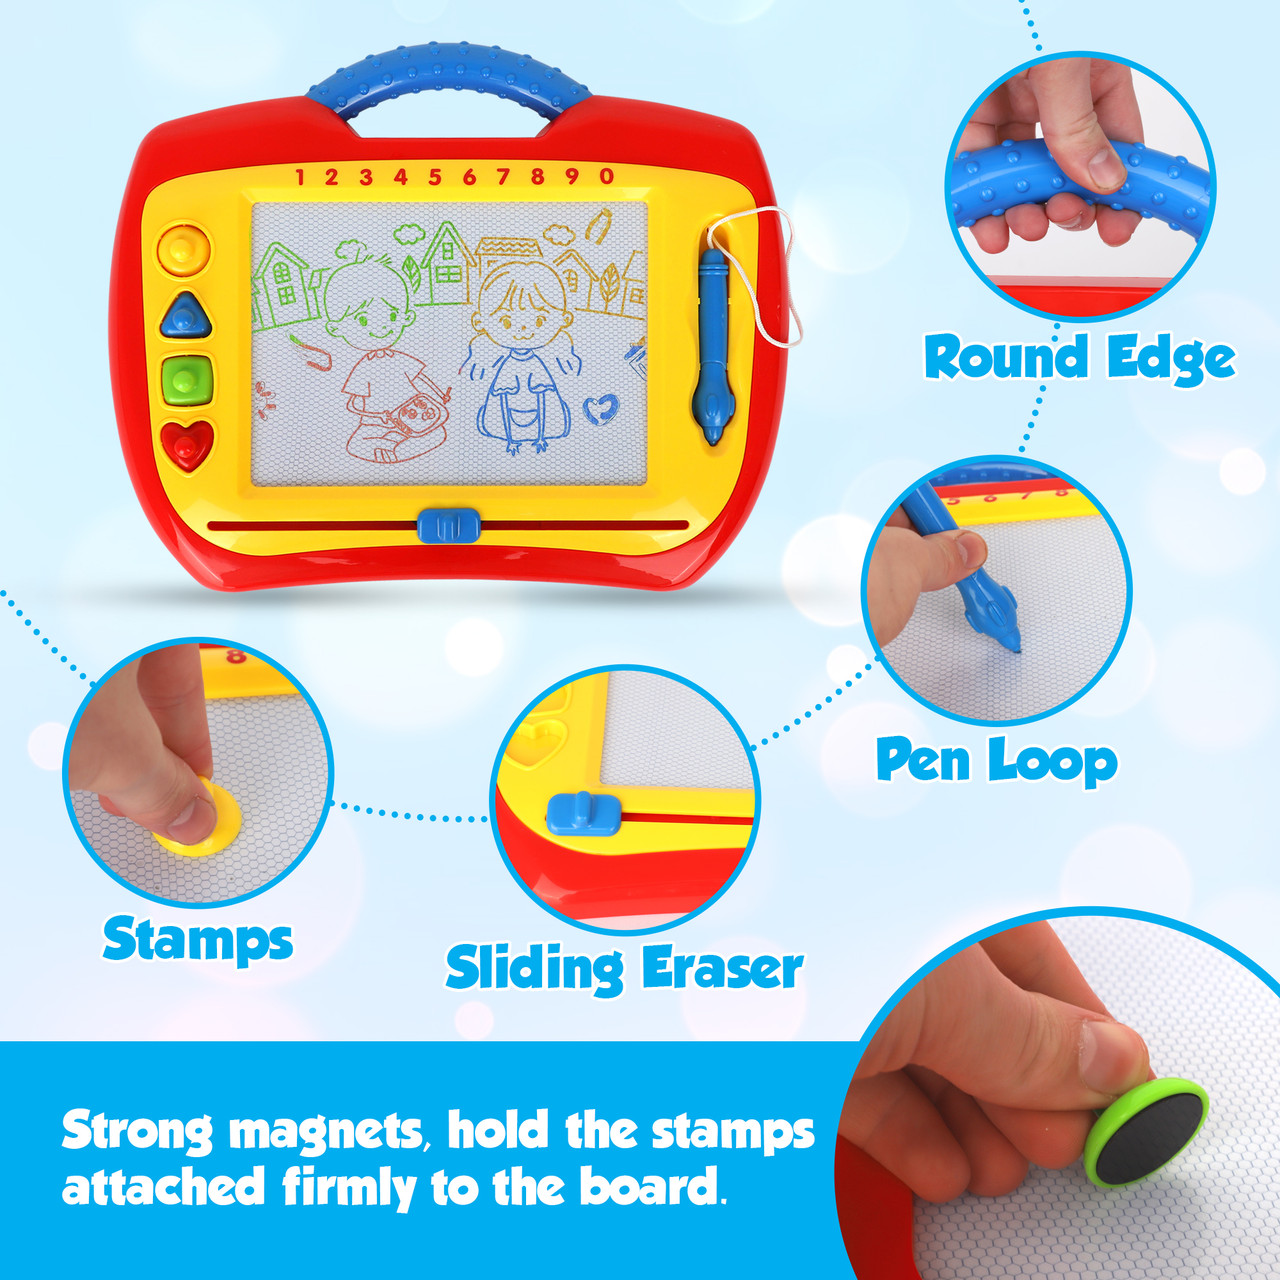 Play Kidiz Color Doodler Drawing Board Toy for Kids, Board Painting Sketch Pad, Write and Play, Draw and Stamp, Erase and Write Again, Ages 3+. - Toys 4 U